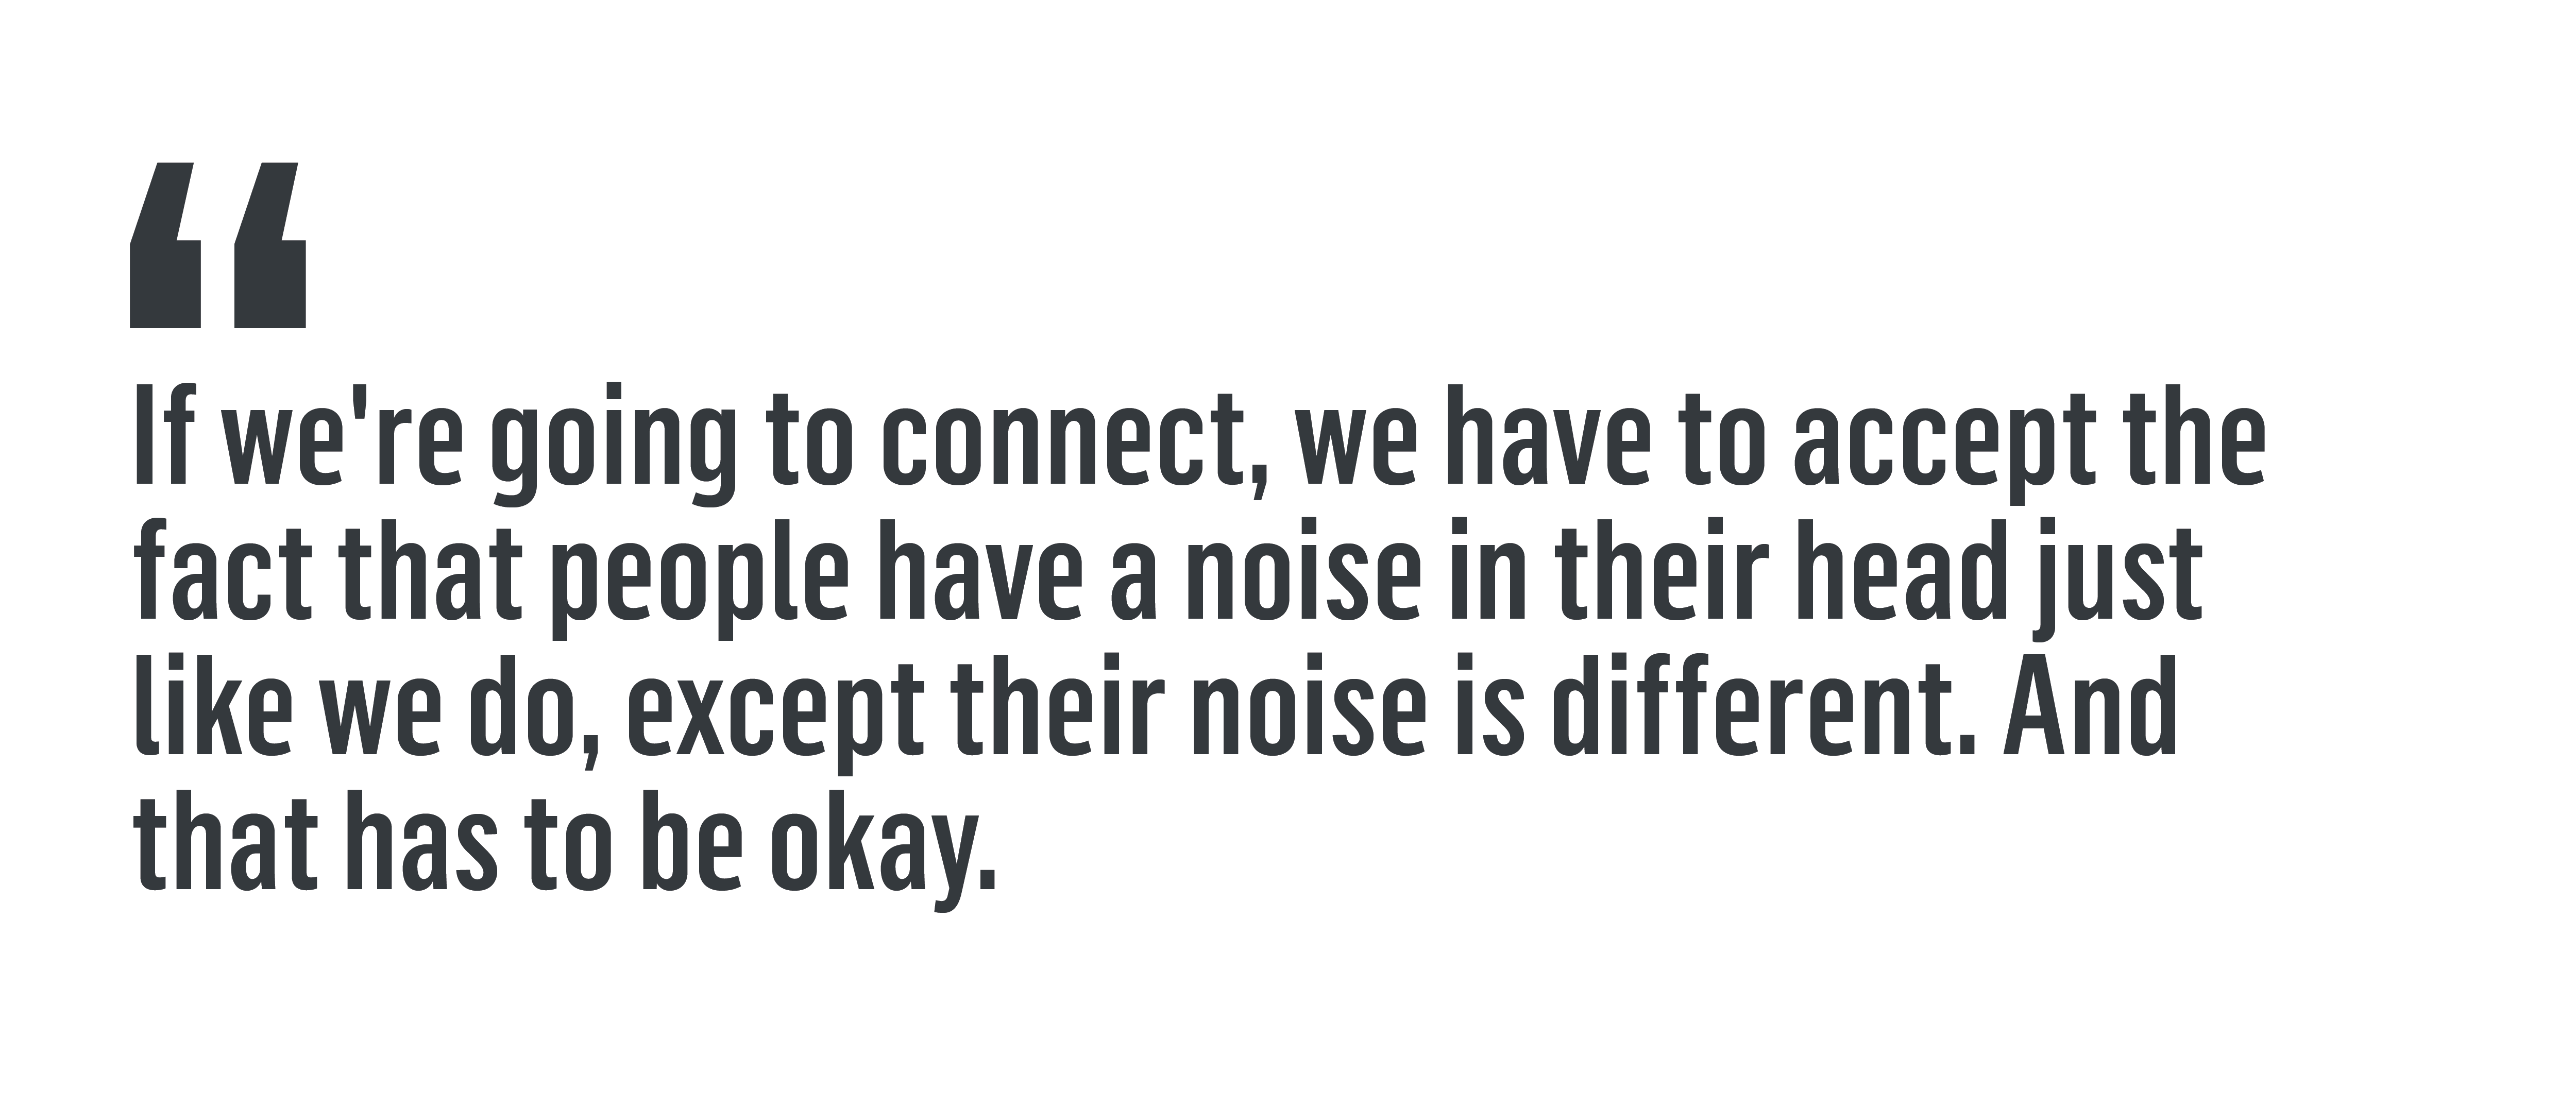 “If we're going to connect, we have to accept the fact that people have a noise in their head just like we do, except their noise is different. And that has to be okay.”